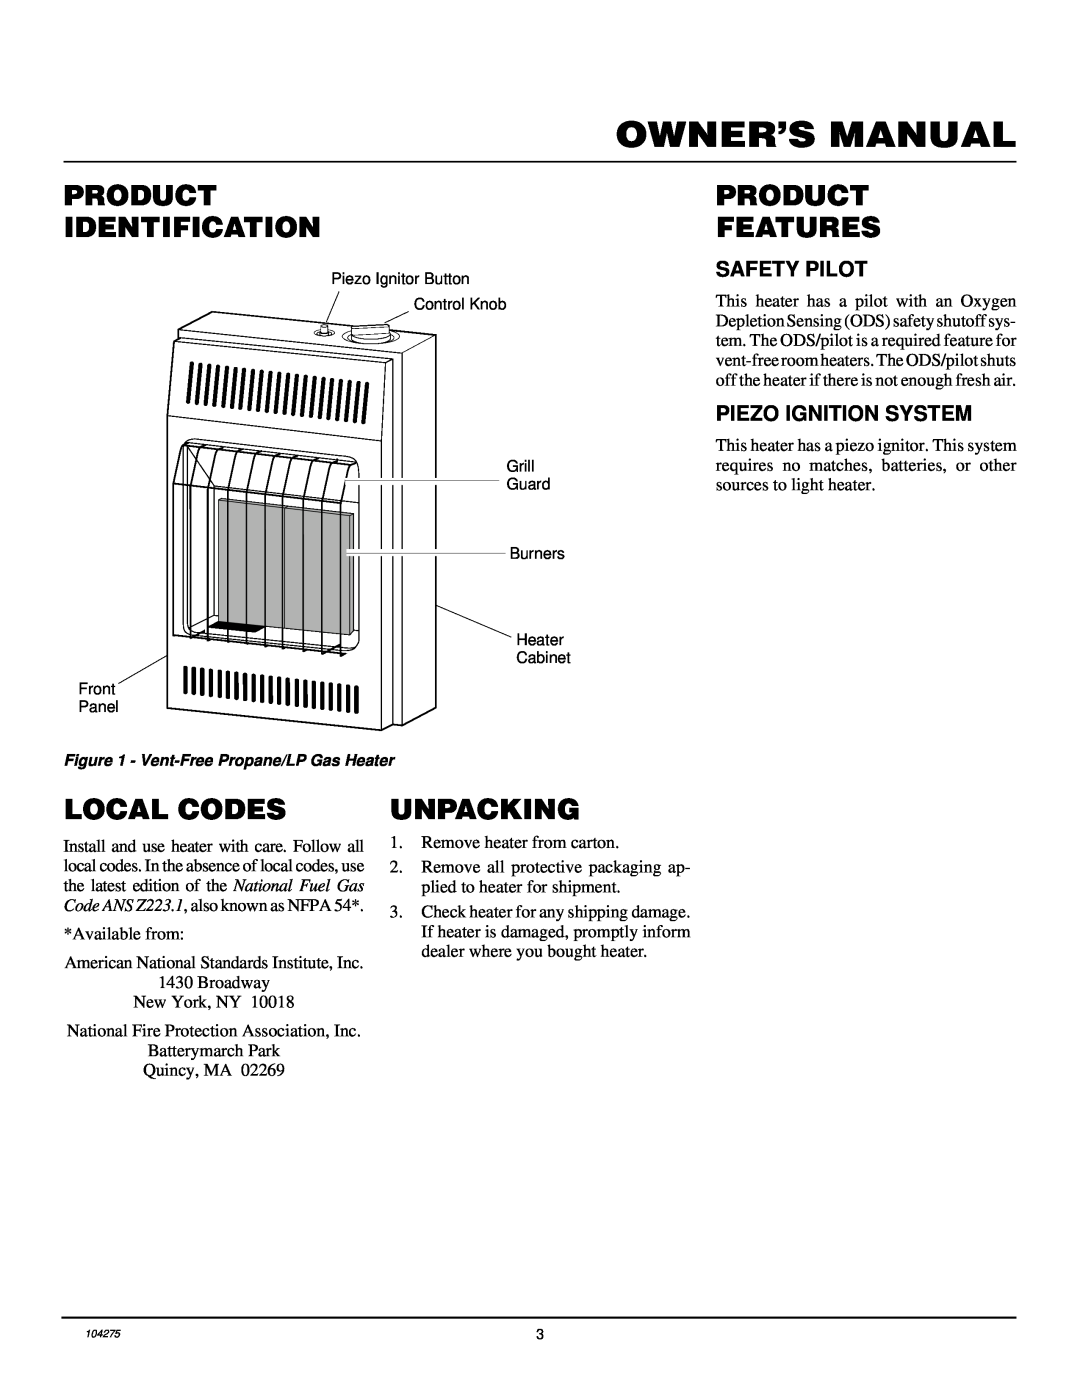 Desa CGP10RLA installation manual Product Identification, Product Features, Local Codes, Unpacking 